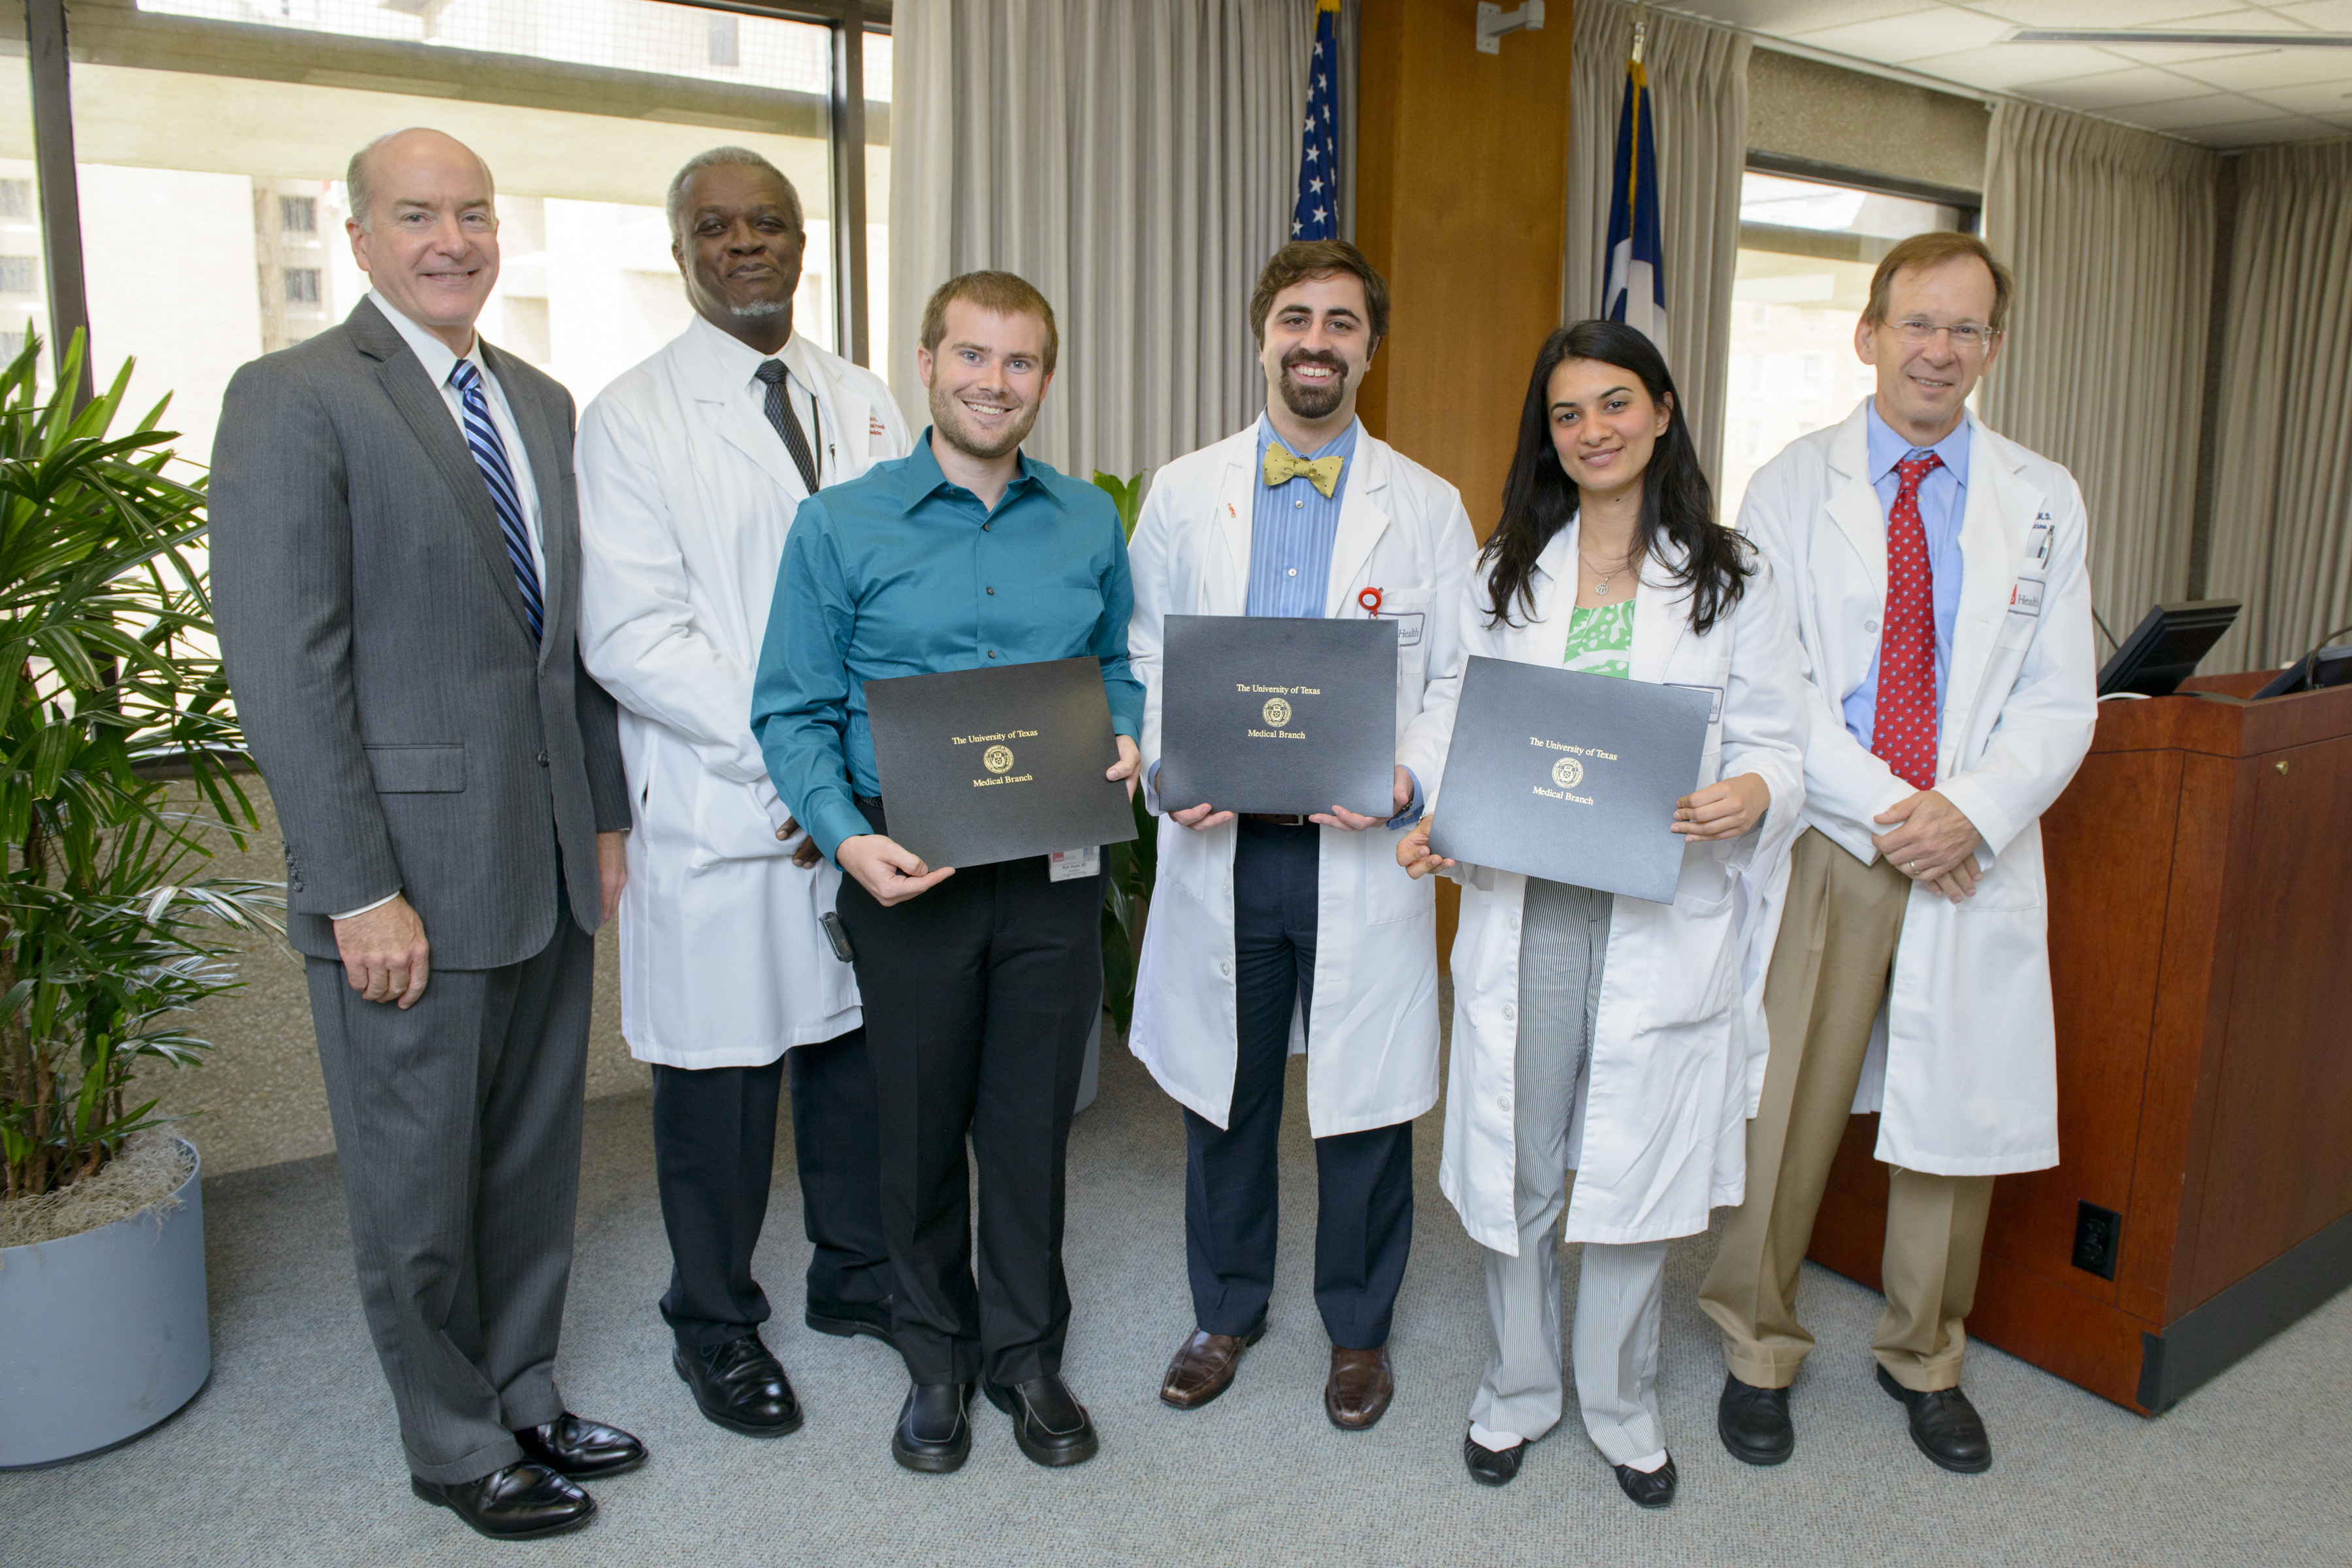 Naiomi Jamal, MD (2nd from the right) was nominated for the 2013 Outstanding Intern Award